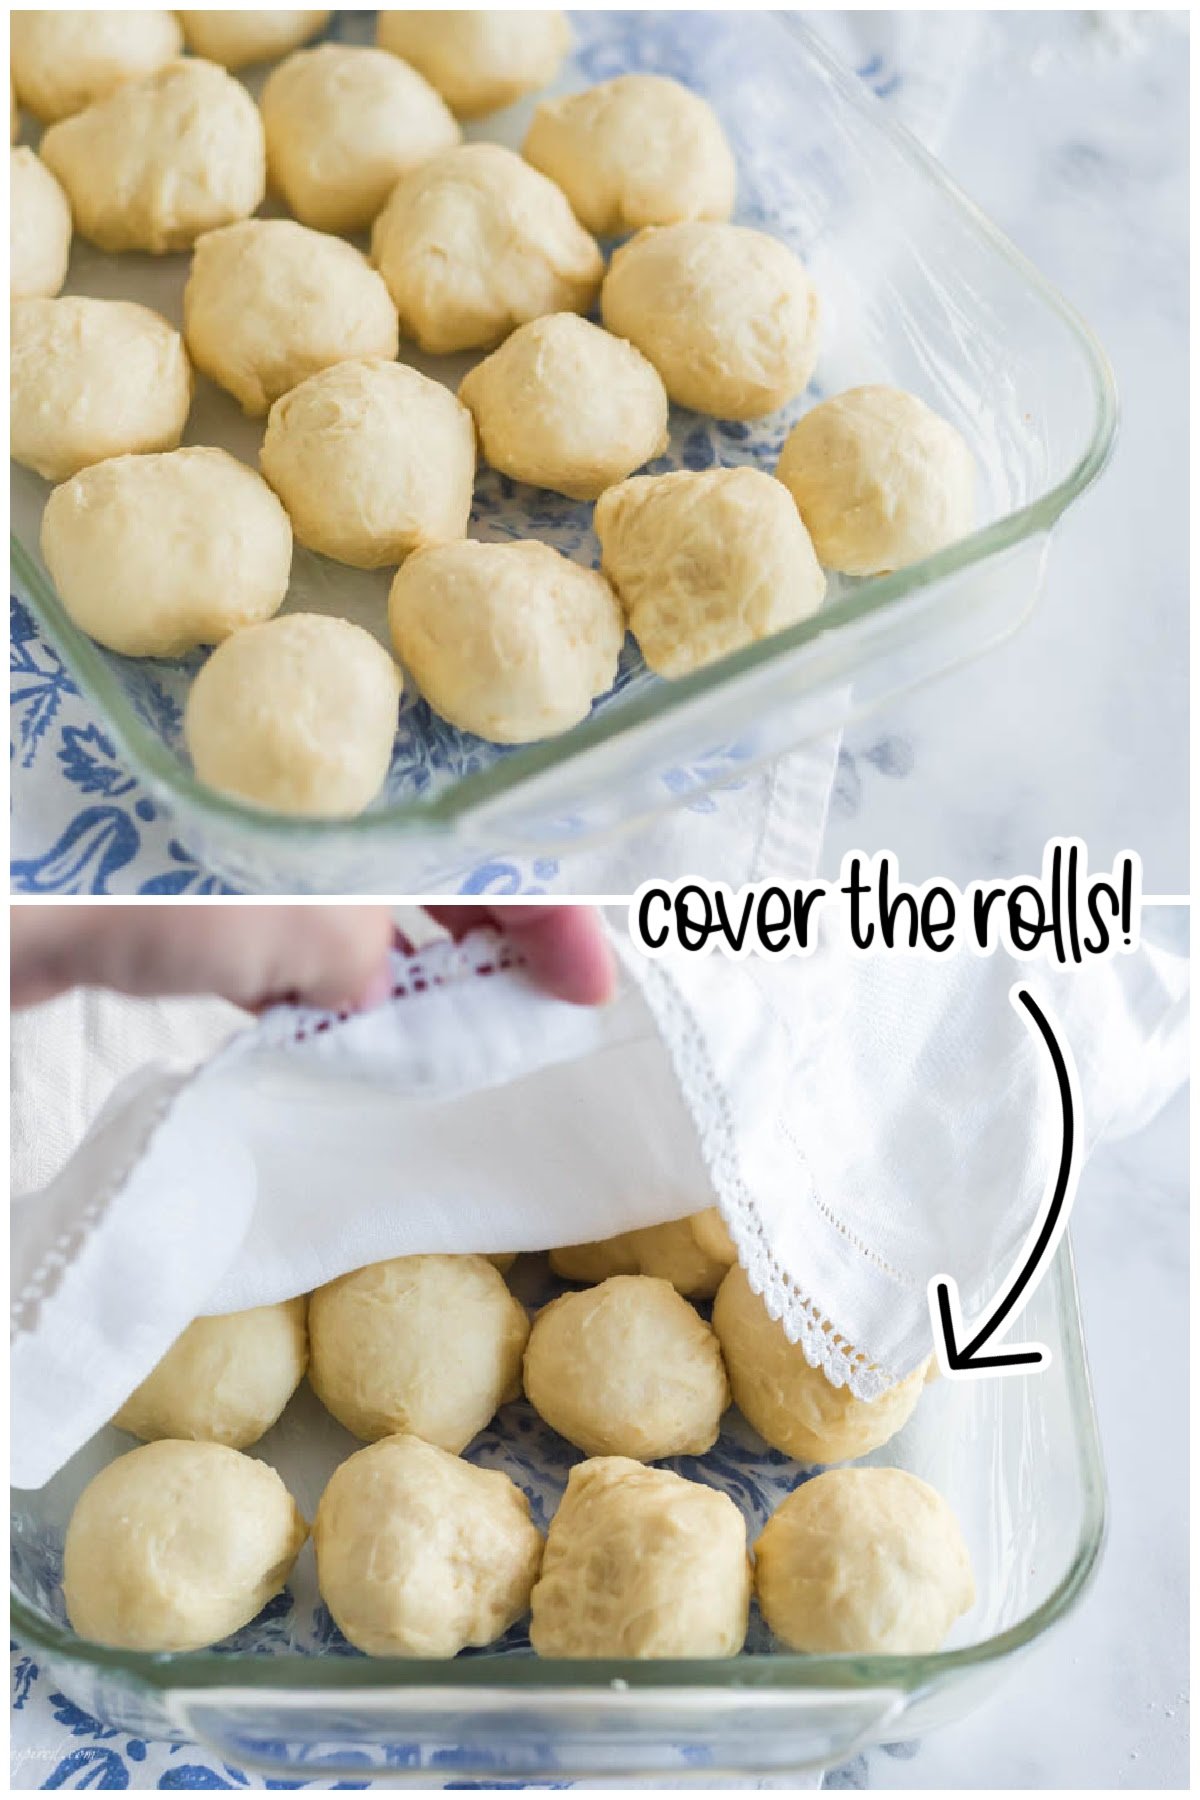 Balls of dough lined up in glass baking dish and linen being folded down over the rolls with text "cover the rolls!"